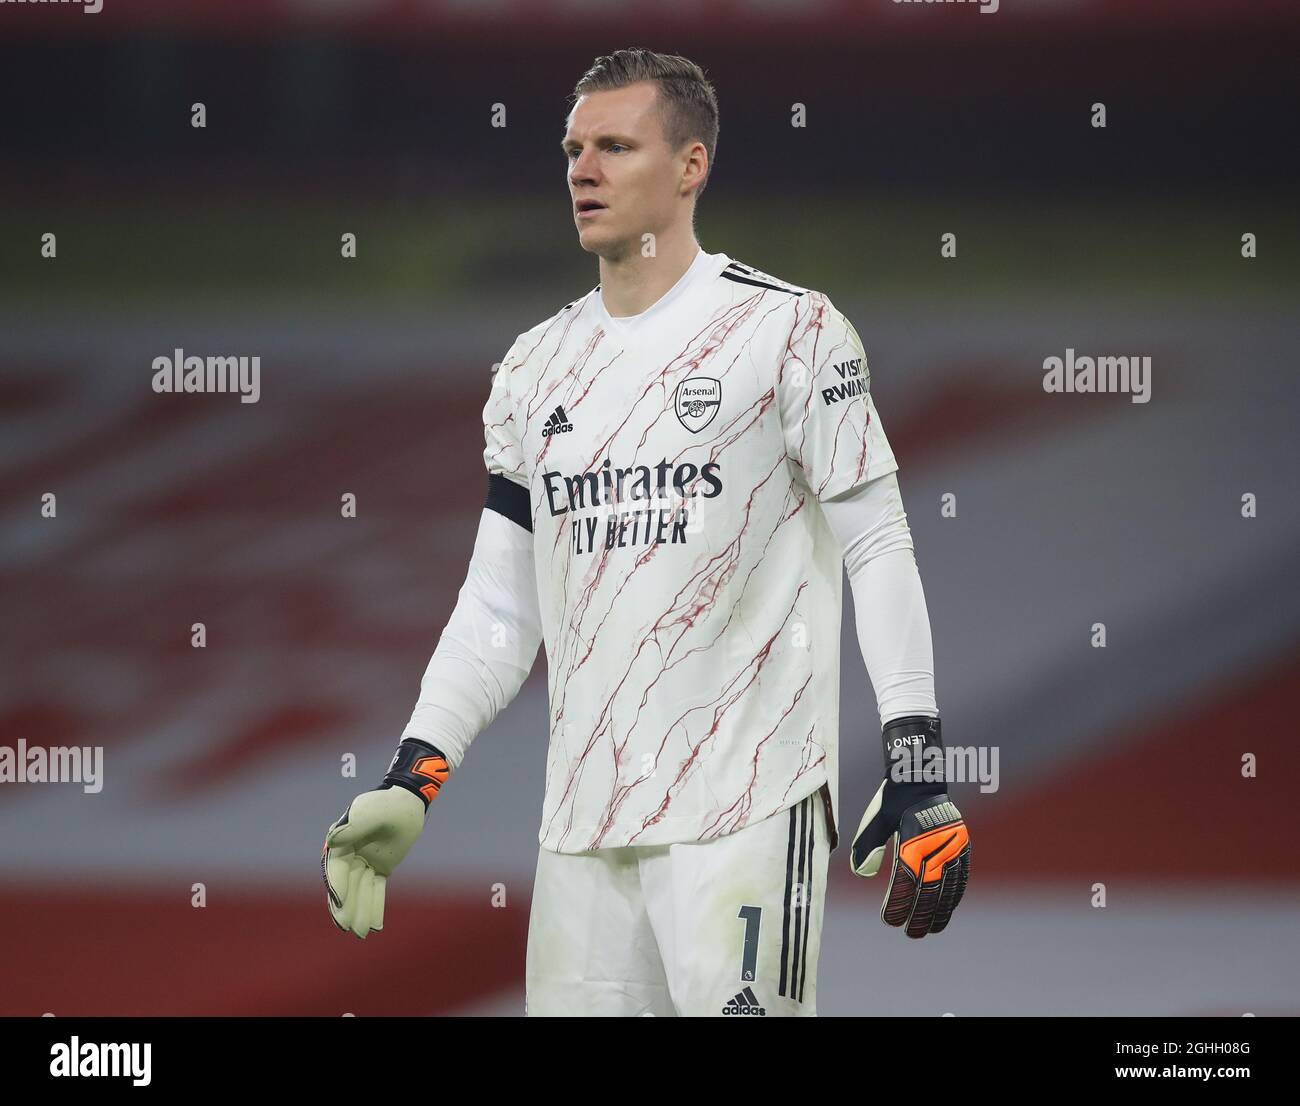 Bernd Leno of Arsenal in the third kit as he had to change before kick off  due to a clash during the Premier League match at the Emirates Stadium,  London. Picture date: